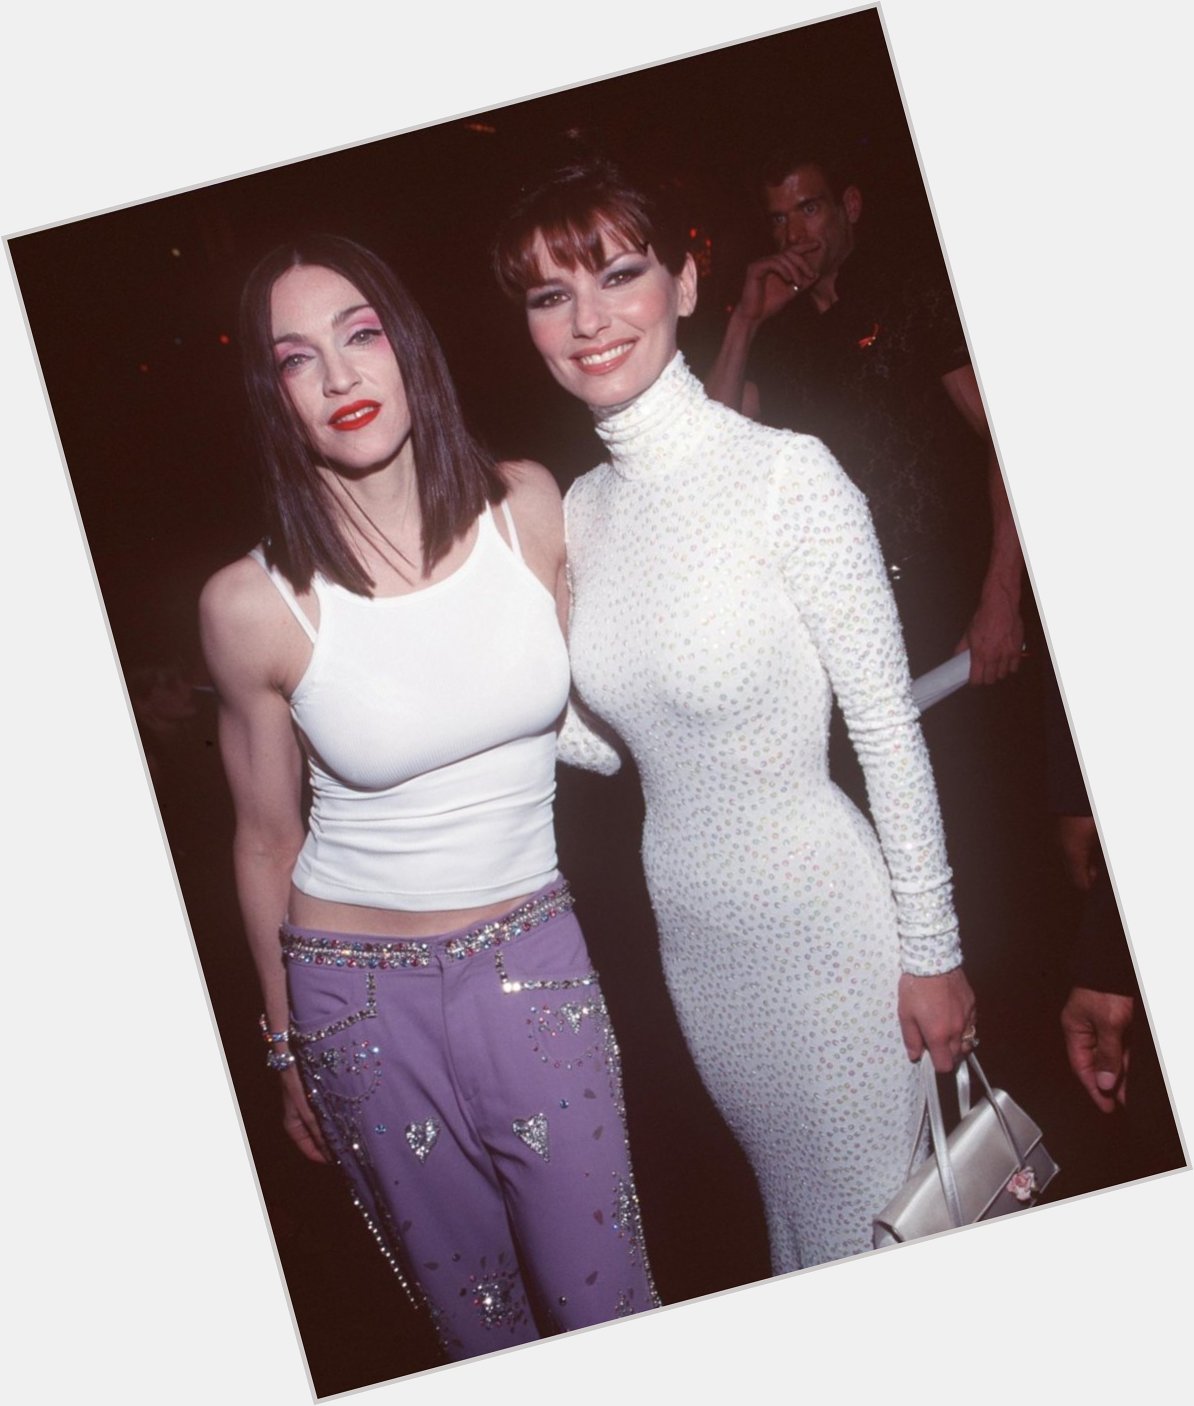 Happy Birthday Madonna! 
Shania Twain and Madonna picrured here at the 1999 Grammys!  